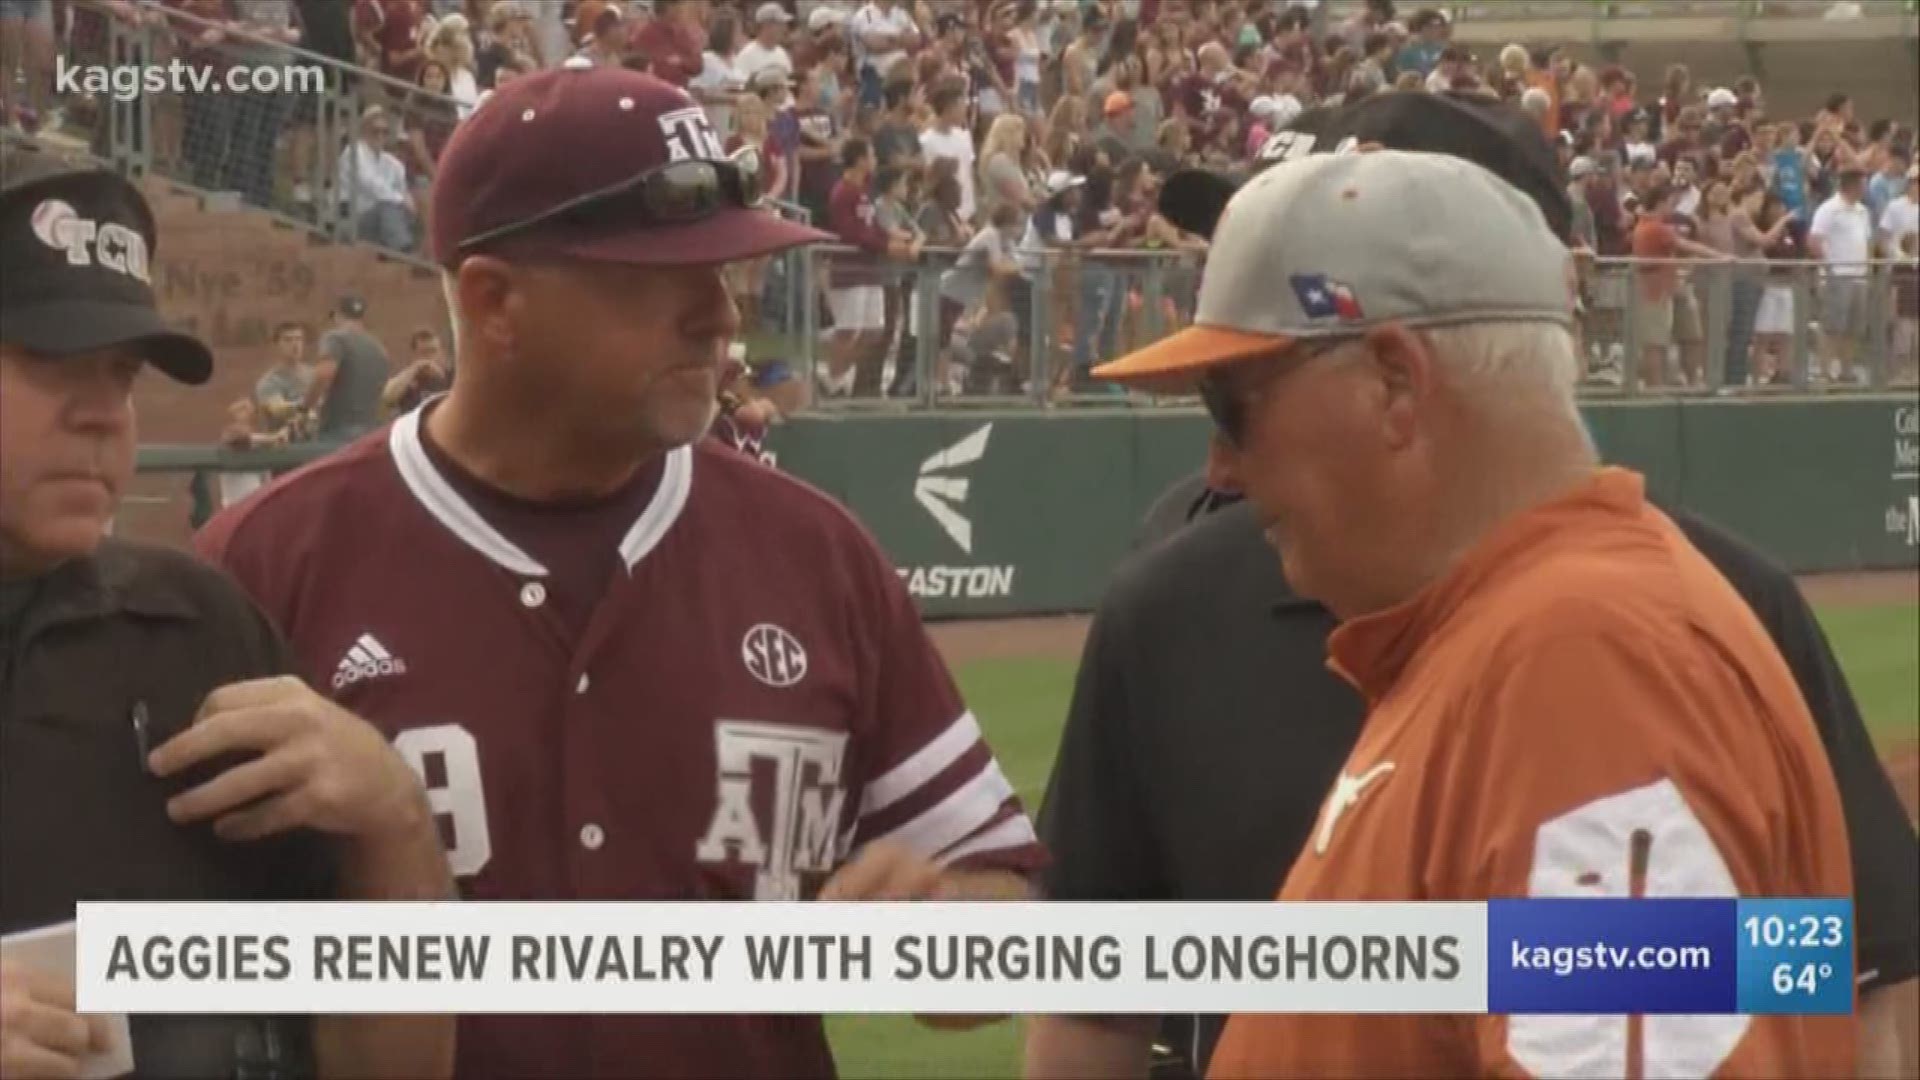 Texas A&M and Texas will renew their rivalry on the diamond on Tuesday at 6 pm at Blue Bell Park.